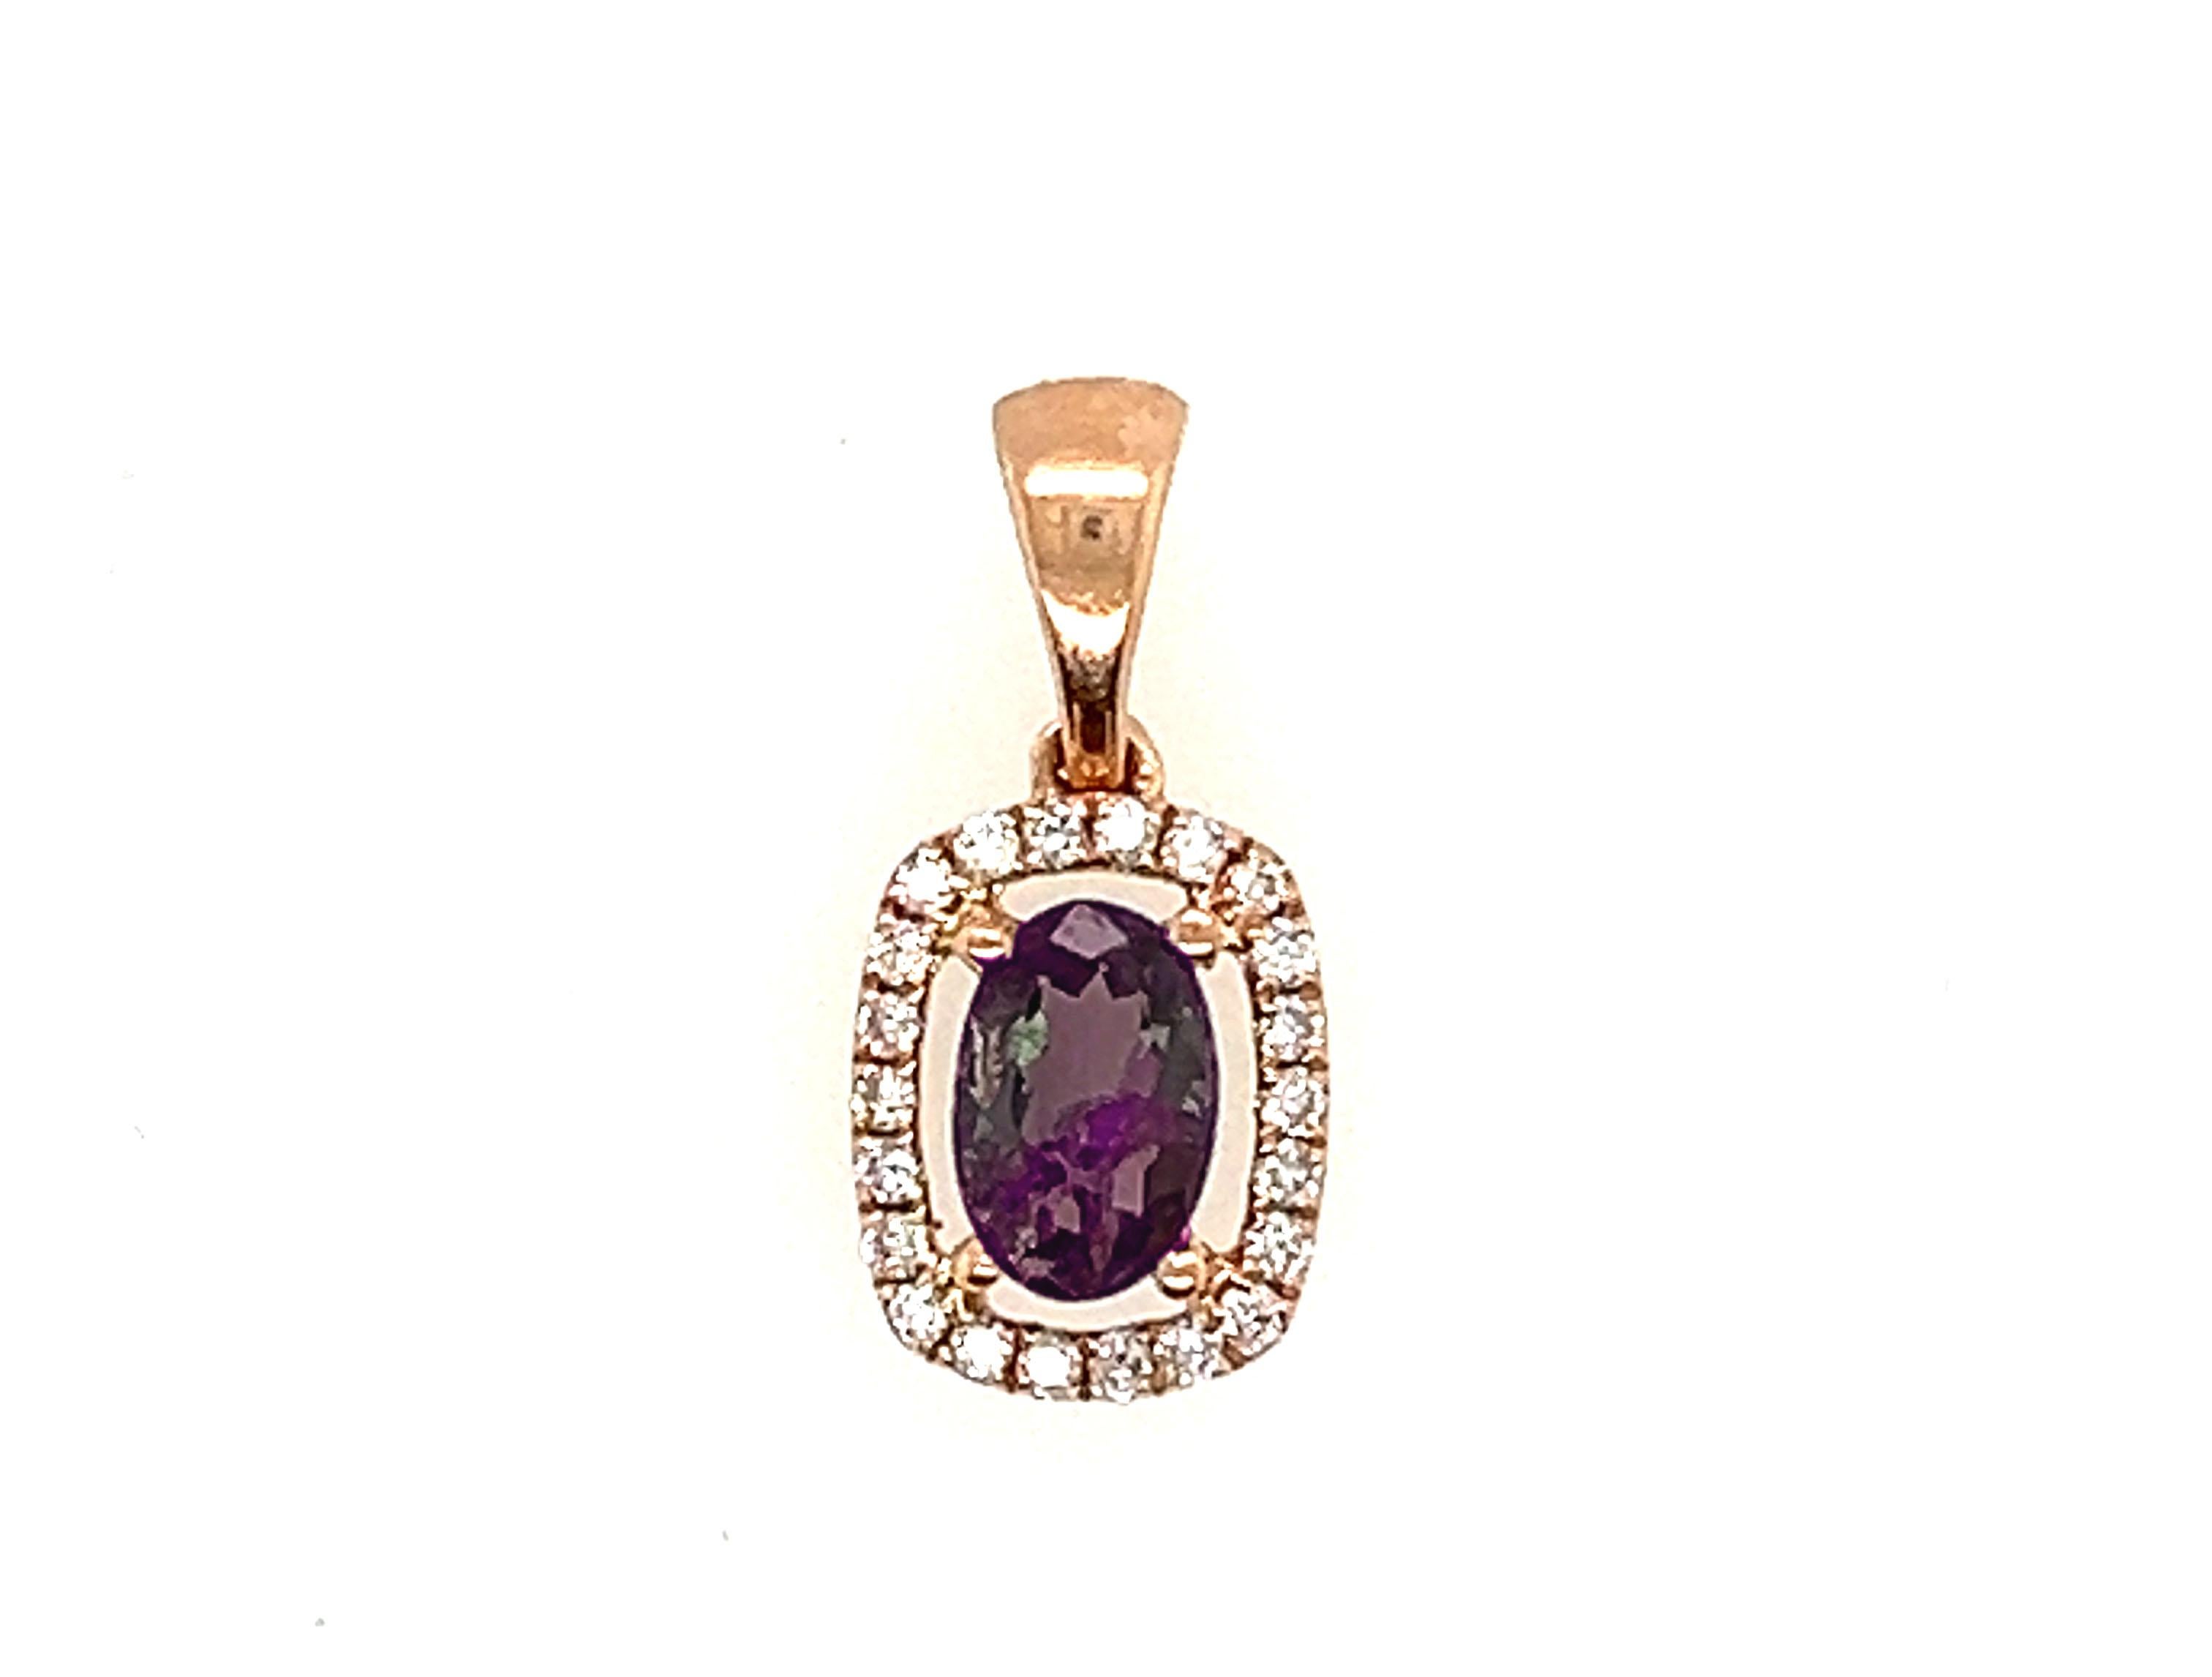 Brand New GIA Natural Alexandrite Diamond Pendant Necklace .70ct Round Brilliant 14K Rose Gold


Featuring a Glamorous Genuine GIA Certified .50ct Oval Natural Alexandrite

Enormous Green-Blue Changing to Purple Color 

Pendant Flaunts Mesmerizing